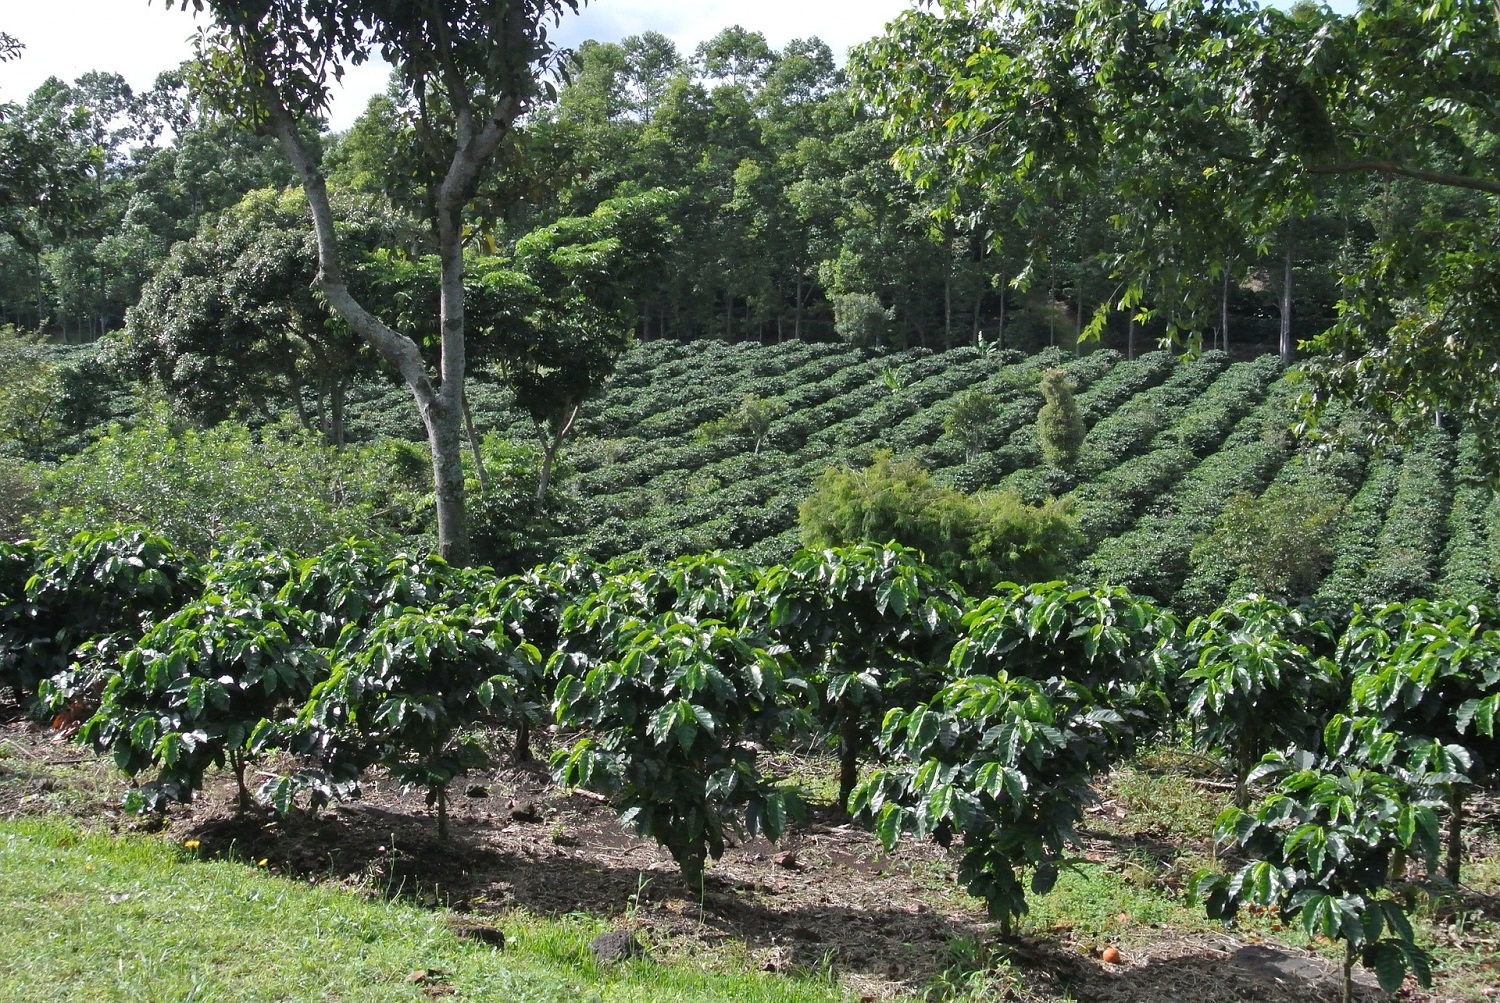 Risks of inappropriate use of glyphosate in coffee groves